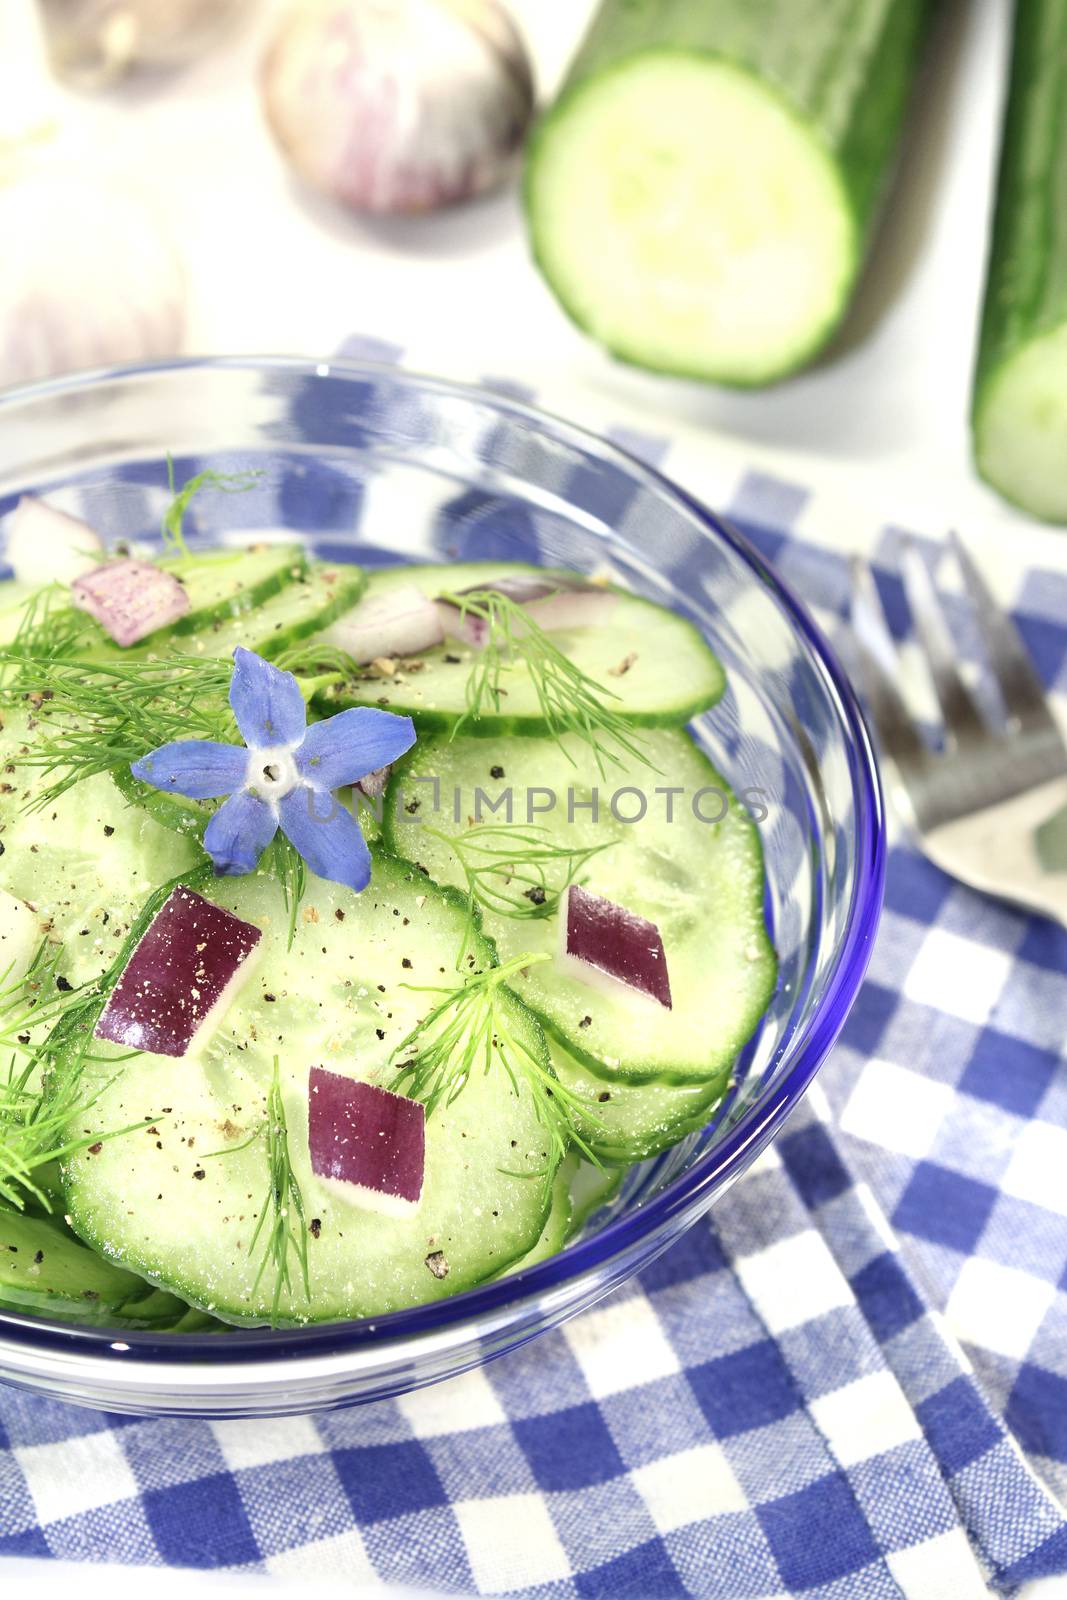 Cucumber salad with onions and borage flower by discovery